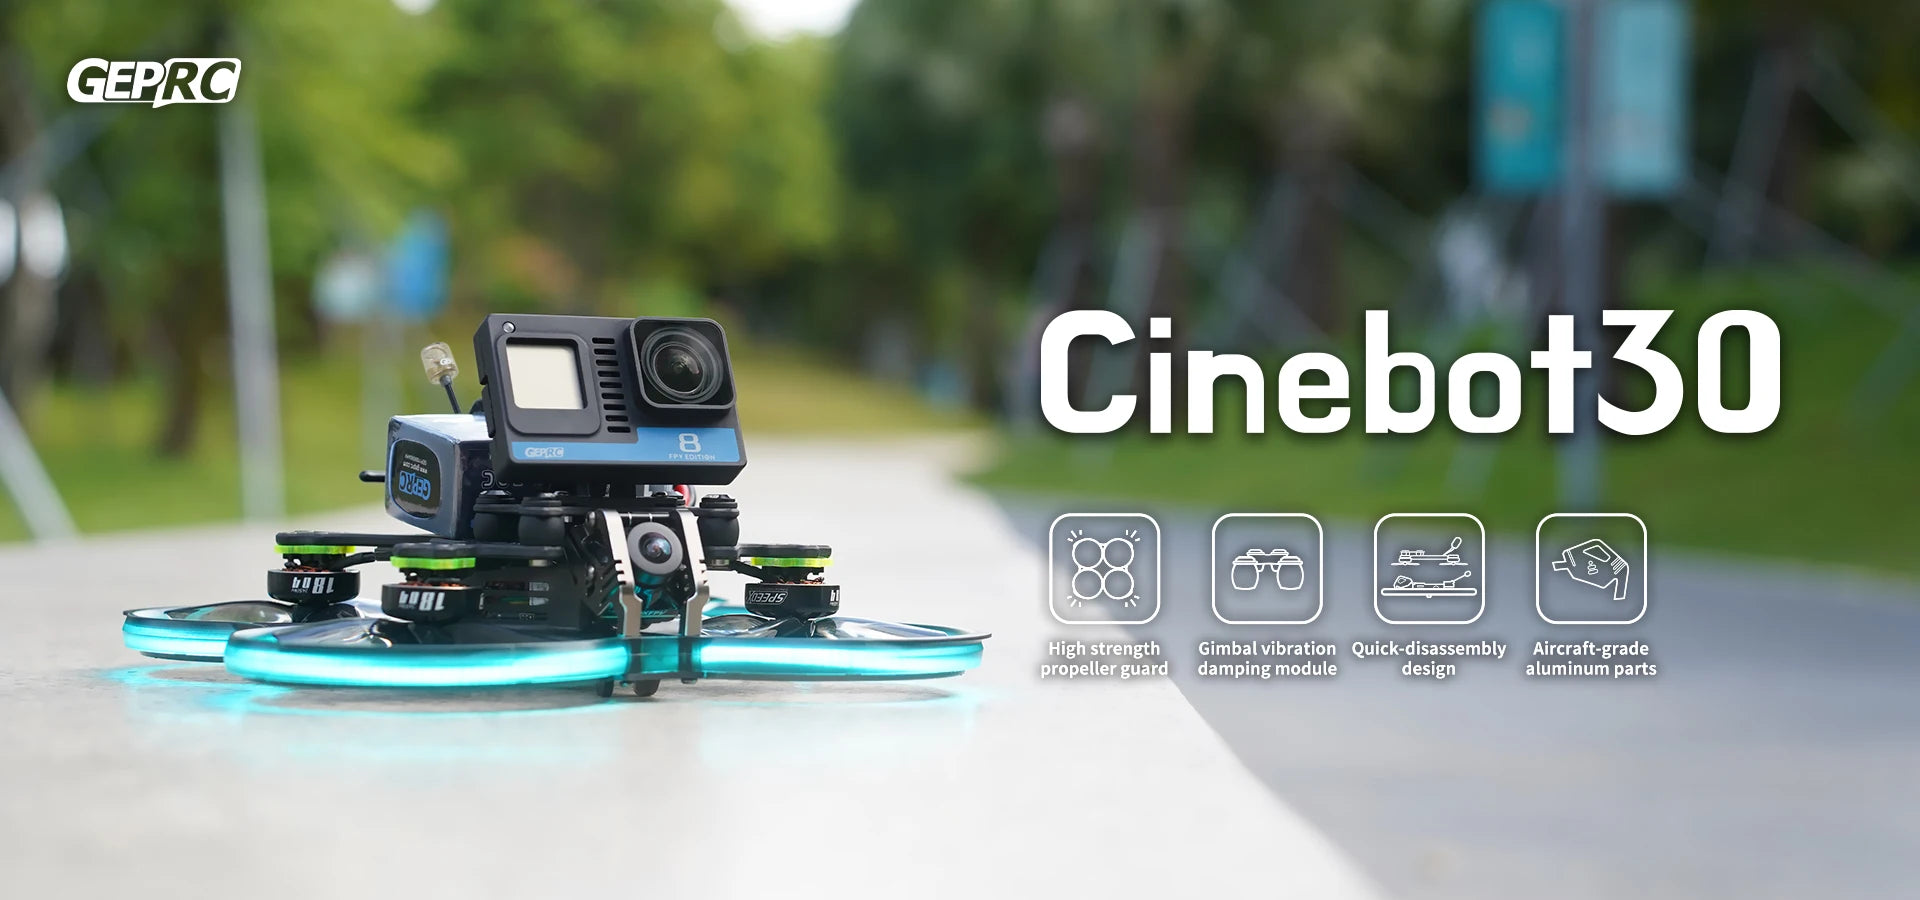 GEPRC Cinebot 30 FPV Drone, GEPRC Cinebot3o 8 CRG 3- 2 High strength Gimbal vibration Quick